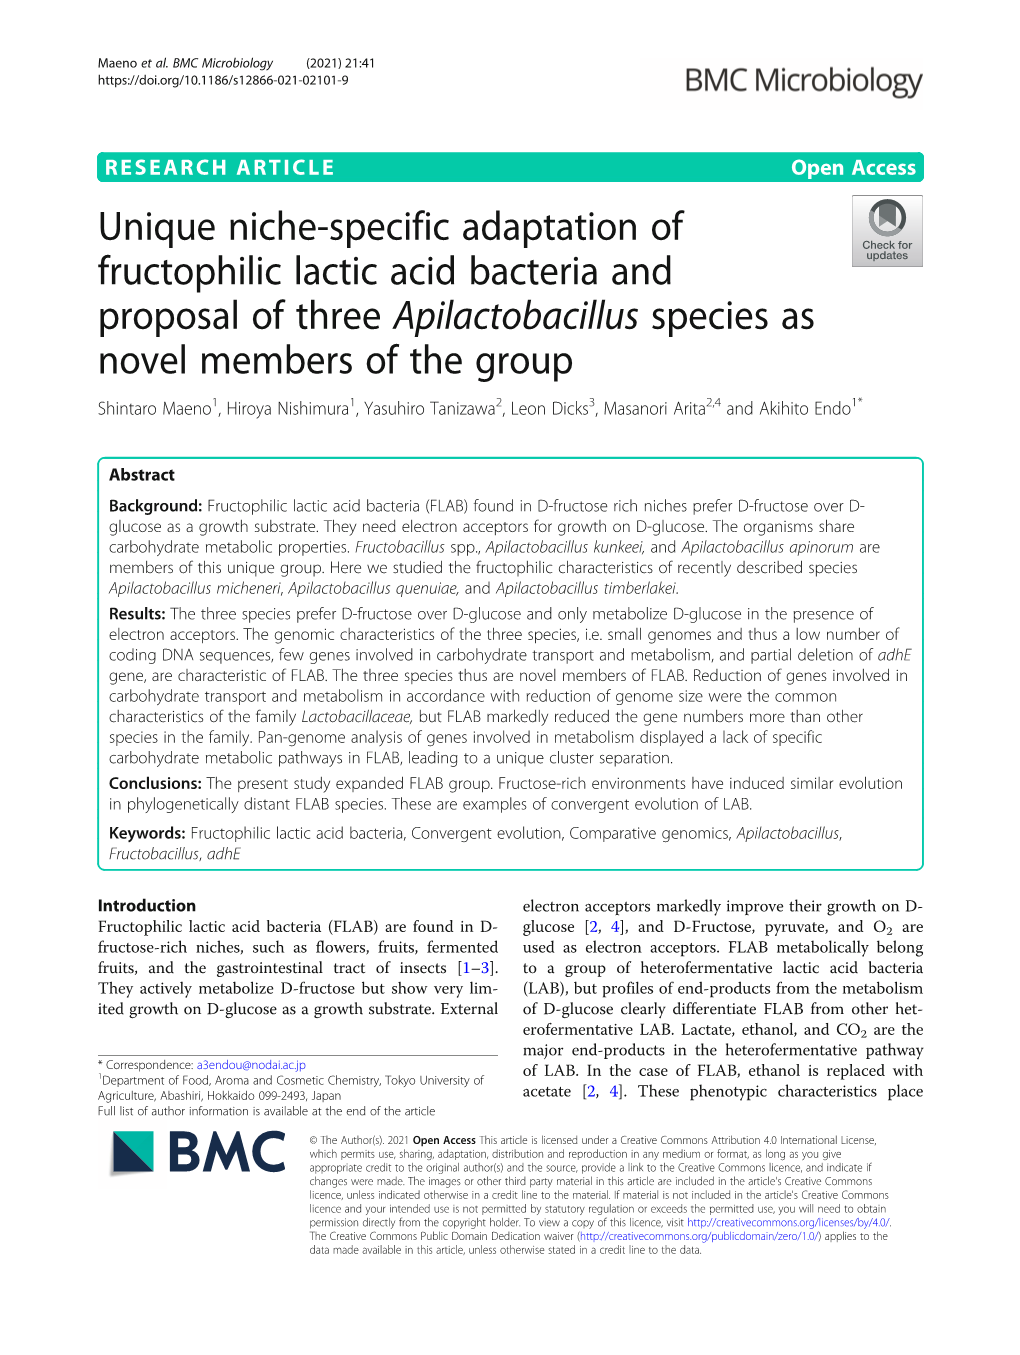 Unique Niche-Specific Adaptation of Fructophilic Lactic Acid Bacteria and Proposal of Three Apilactobacillus Species As Novel Me